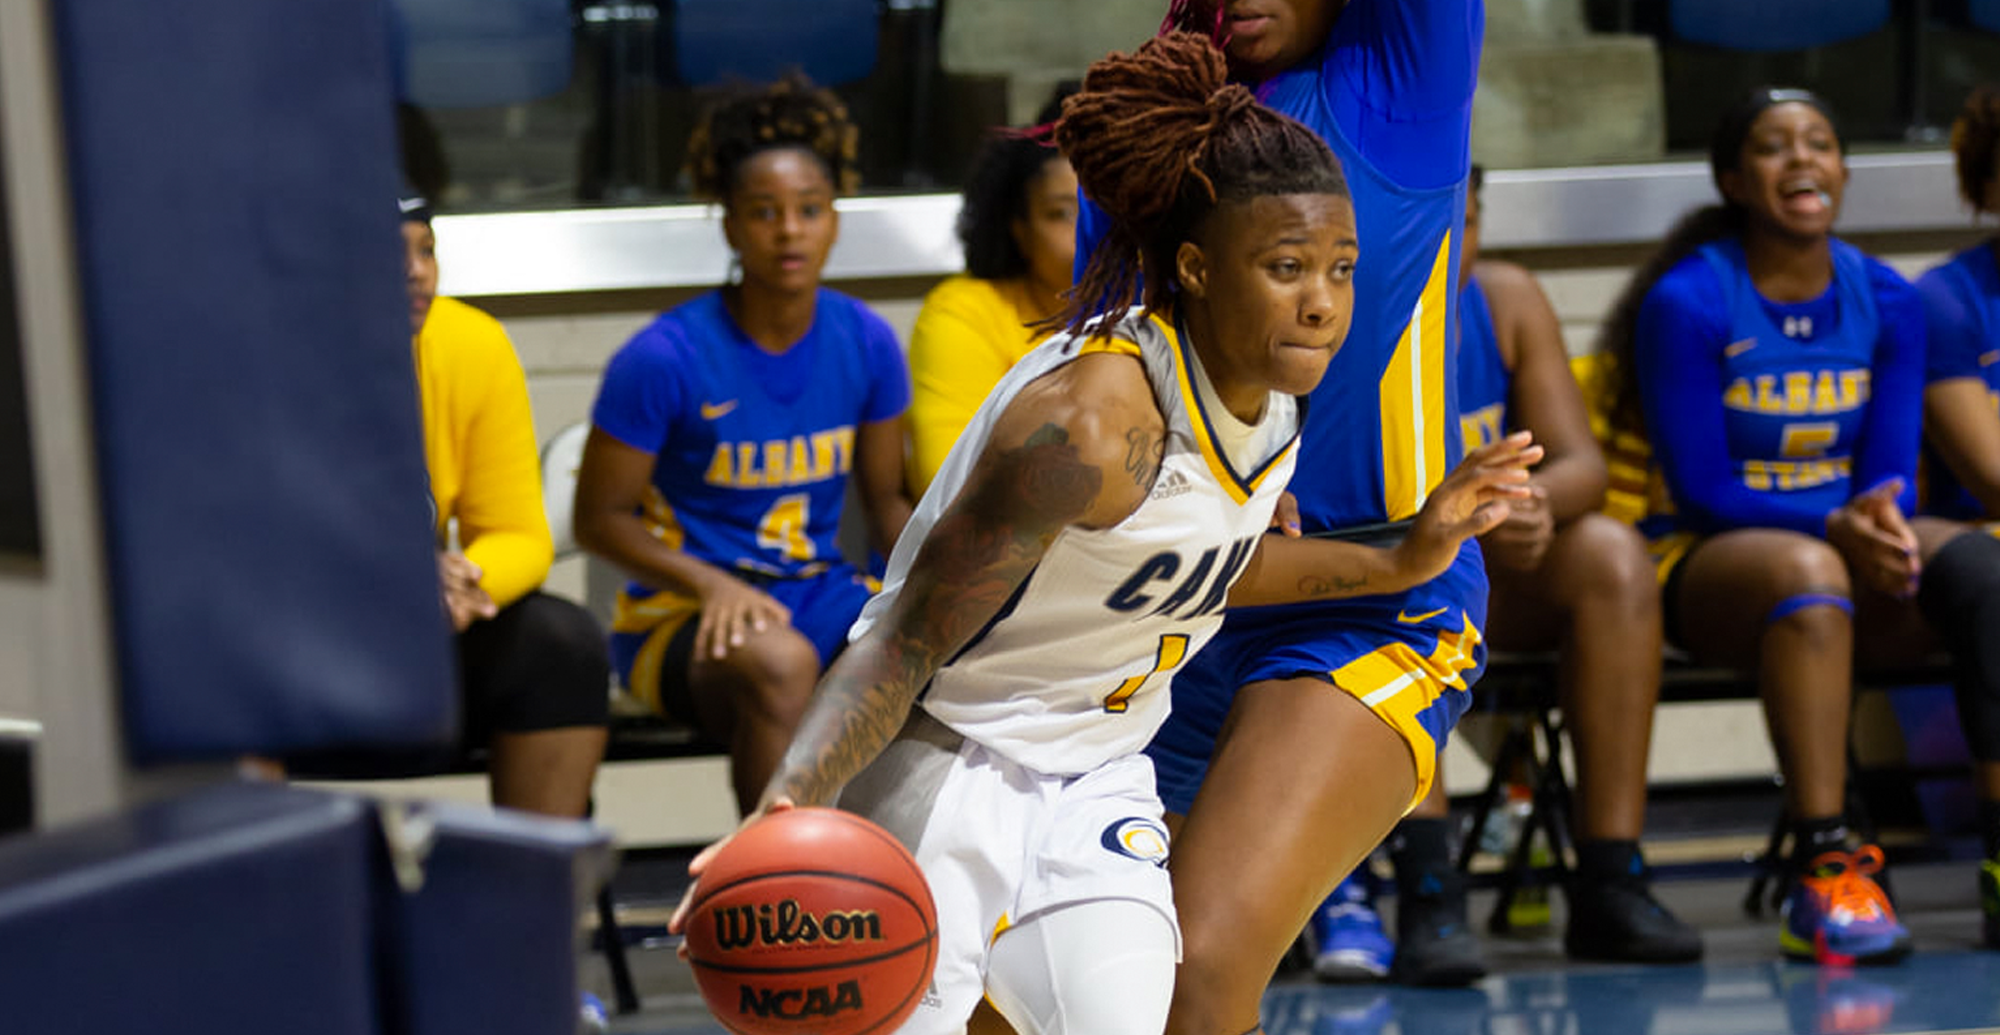 Chatman Scores Career-High 27 Points in Loss